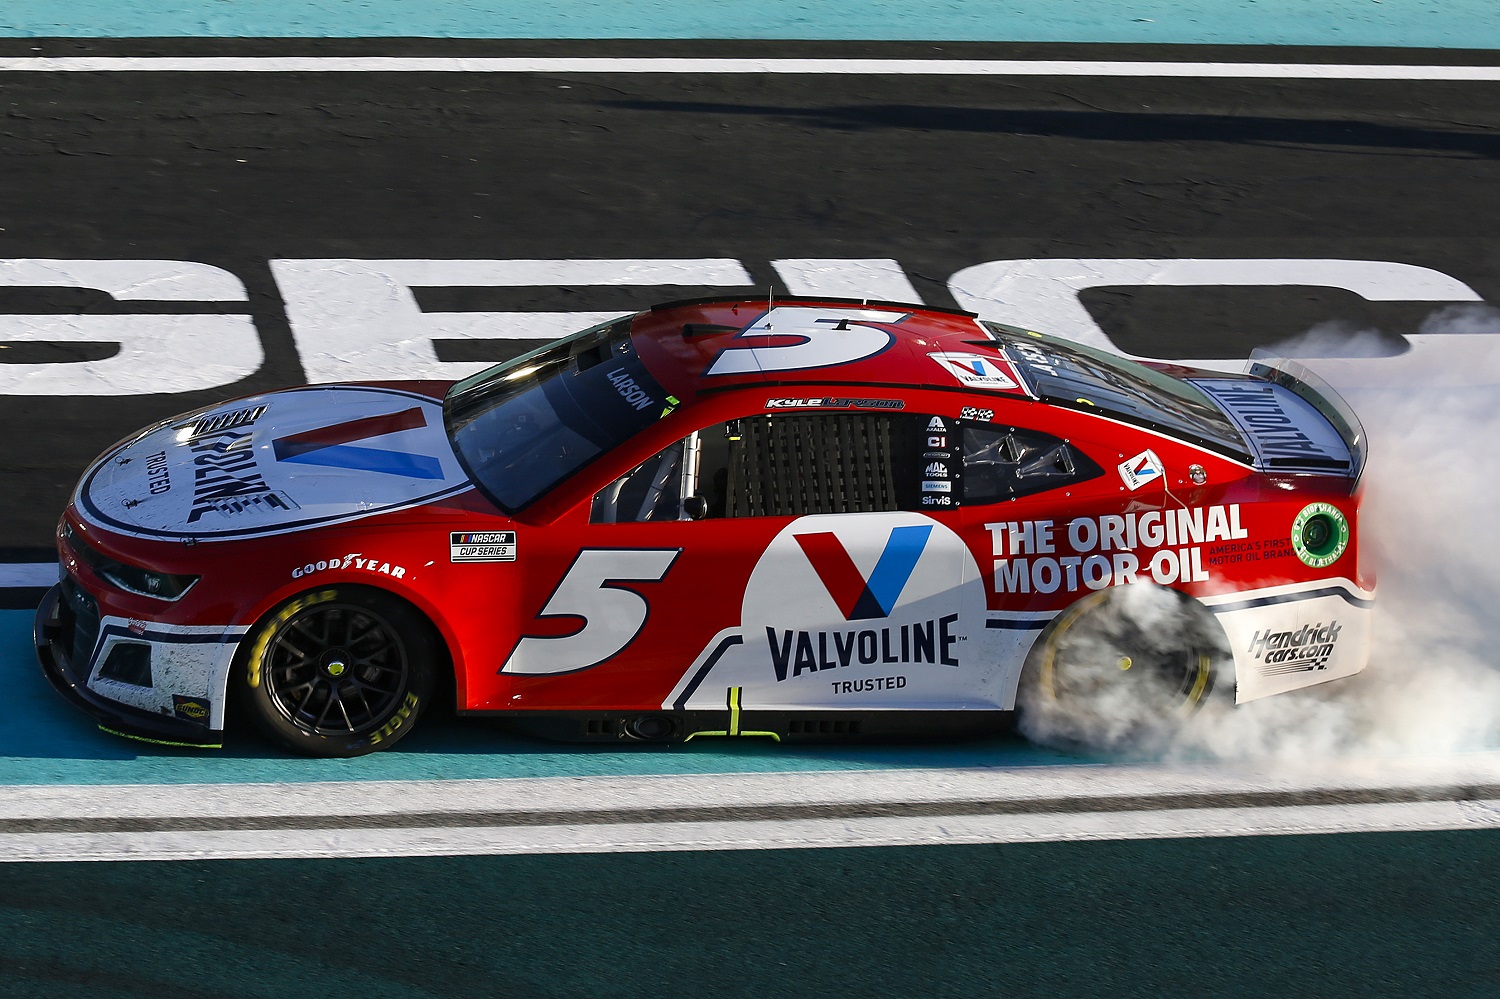 Kyle Larson celebrates with a burnout after winning the NASCAR Cup Series Dixie Vodka 400 at Homestead-Miami Speedway on Oct. 23, 2022.